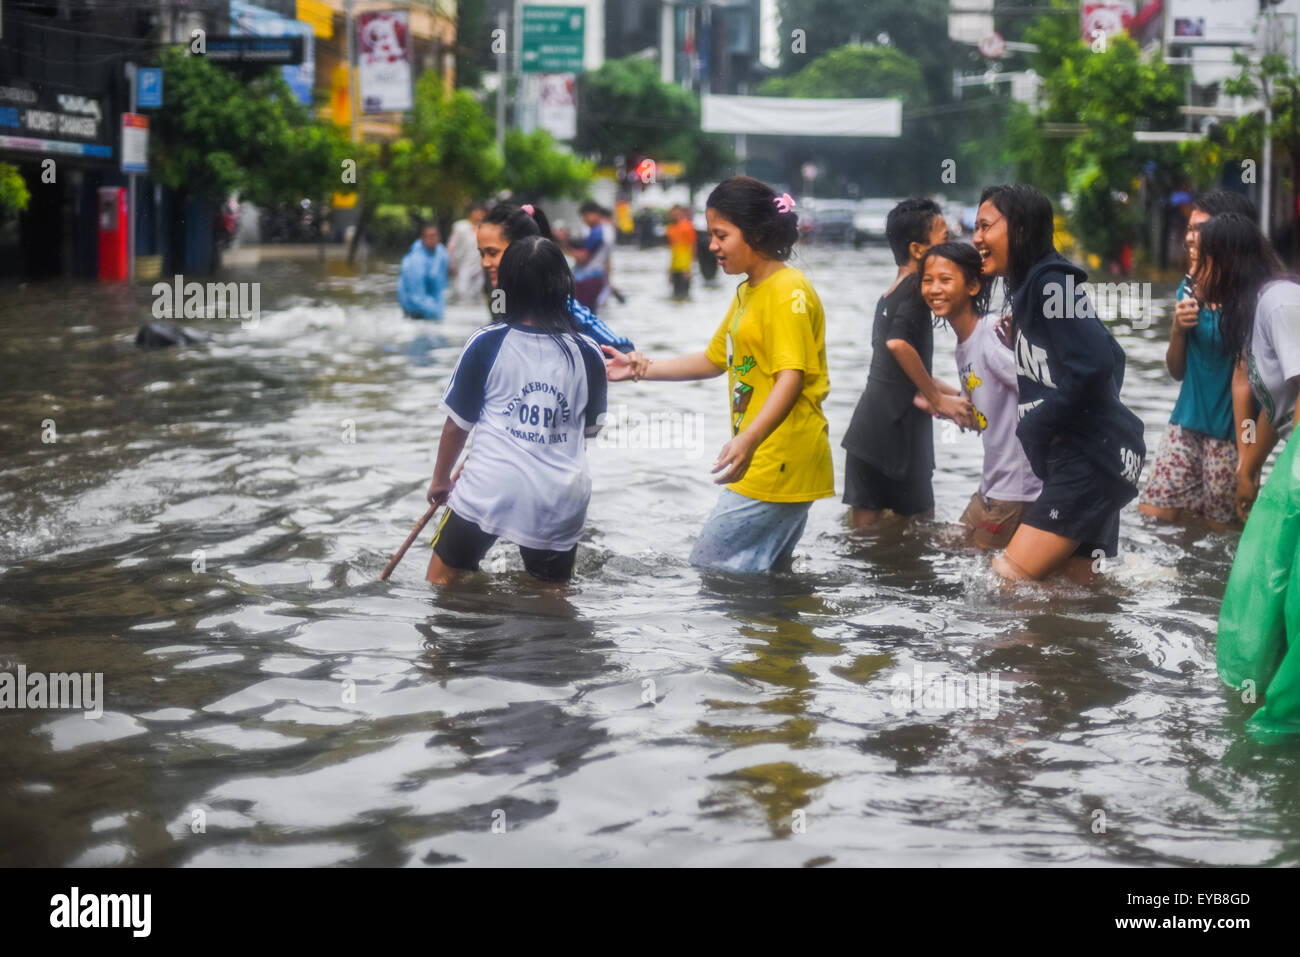 Teenagers crossing through flooded street excitedly. Stock Photo